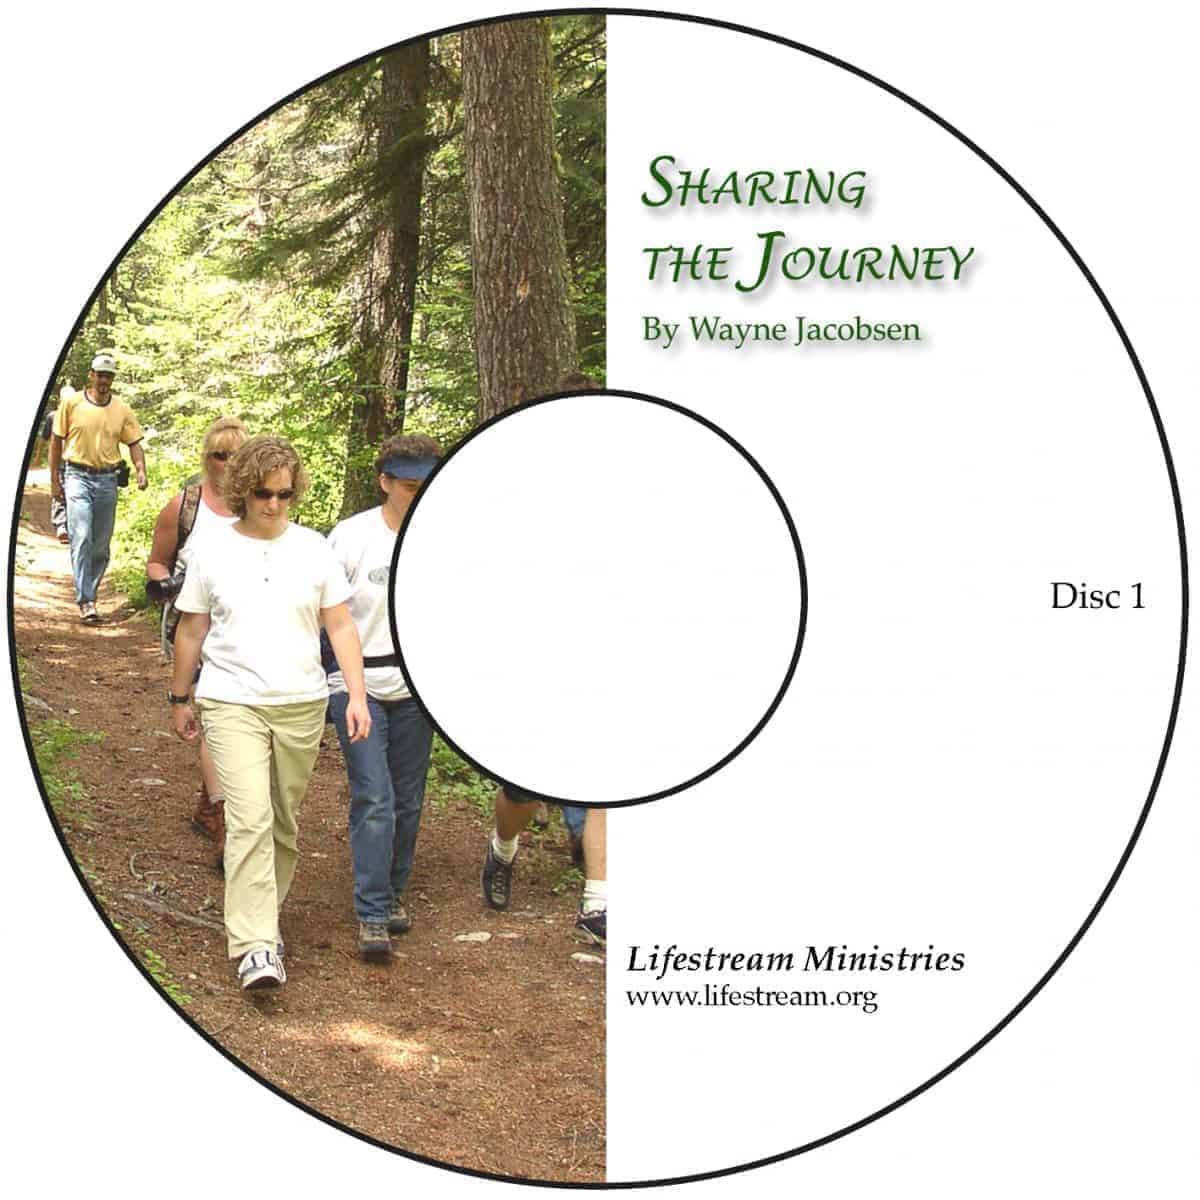 Sharing the Journey [Audio] by Wayne Jacobsen